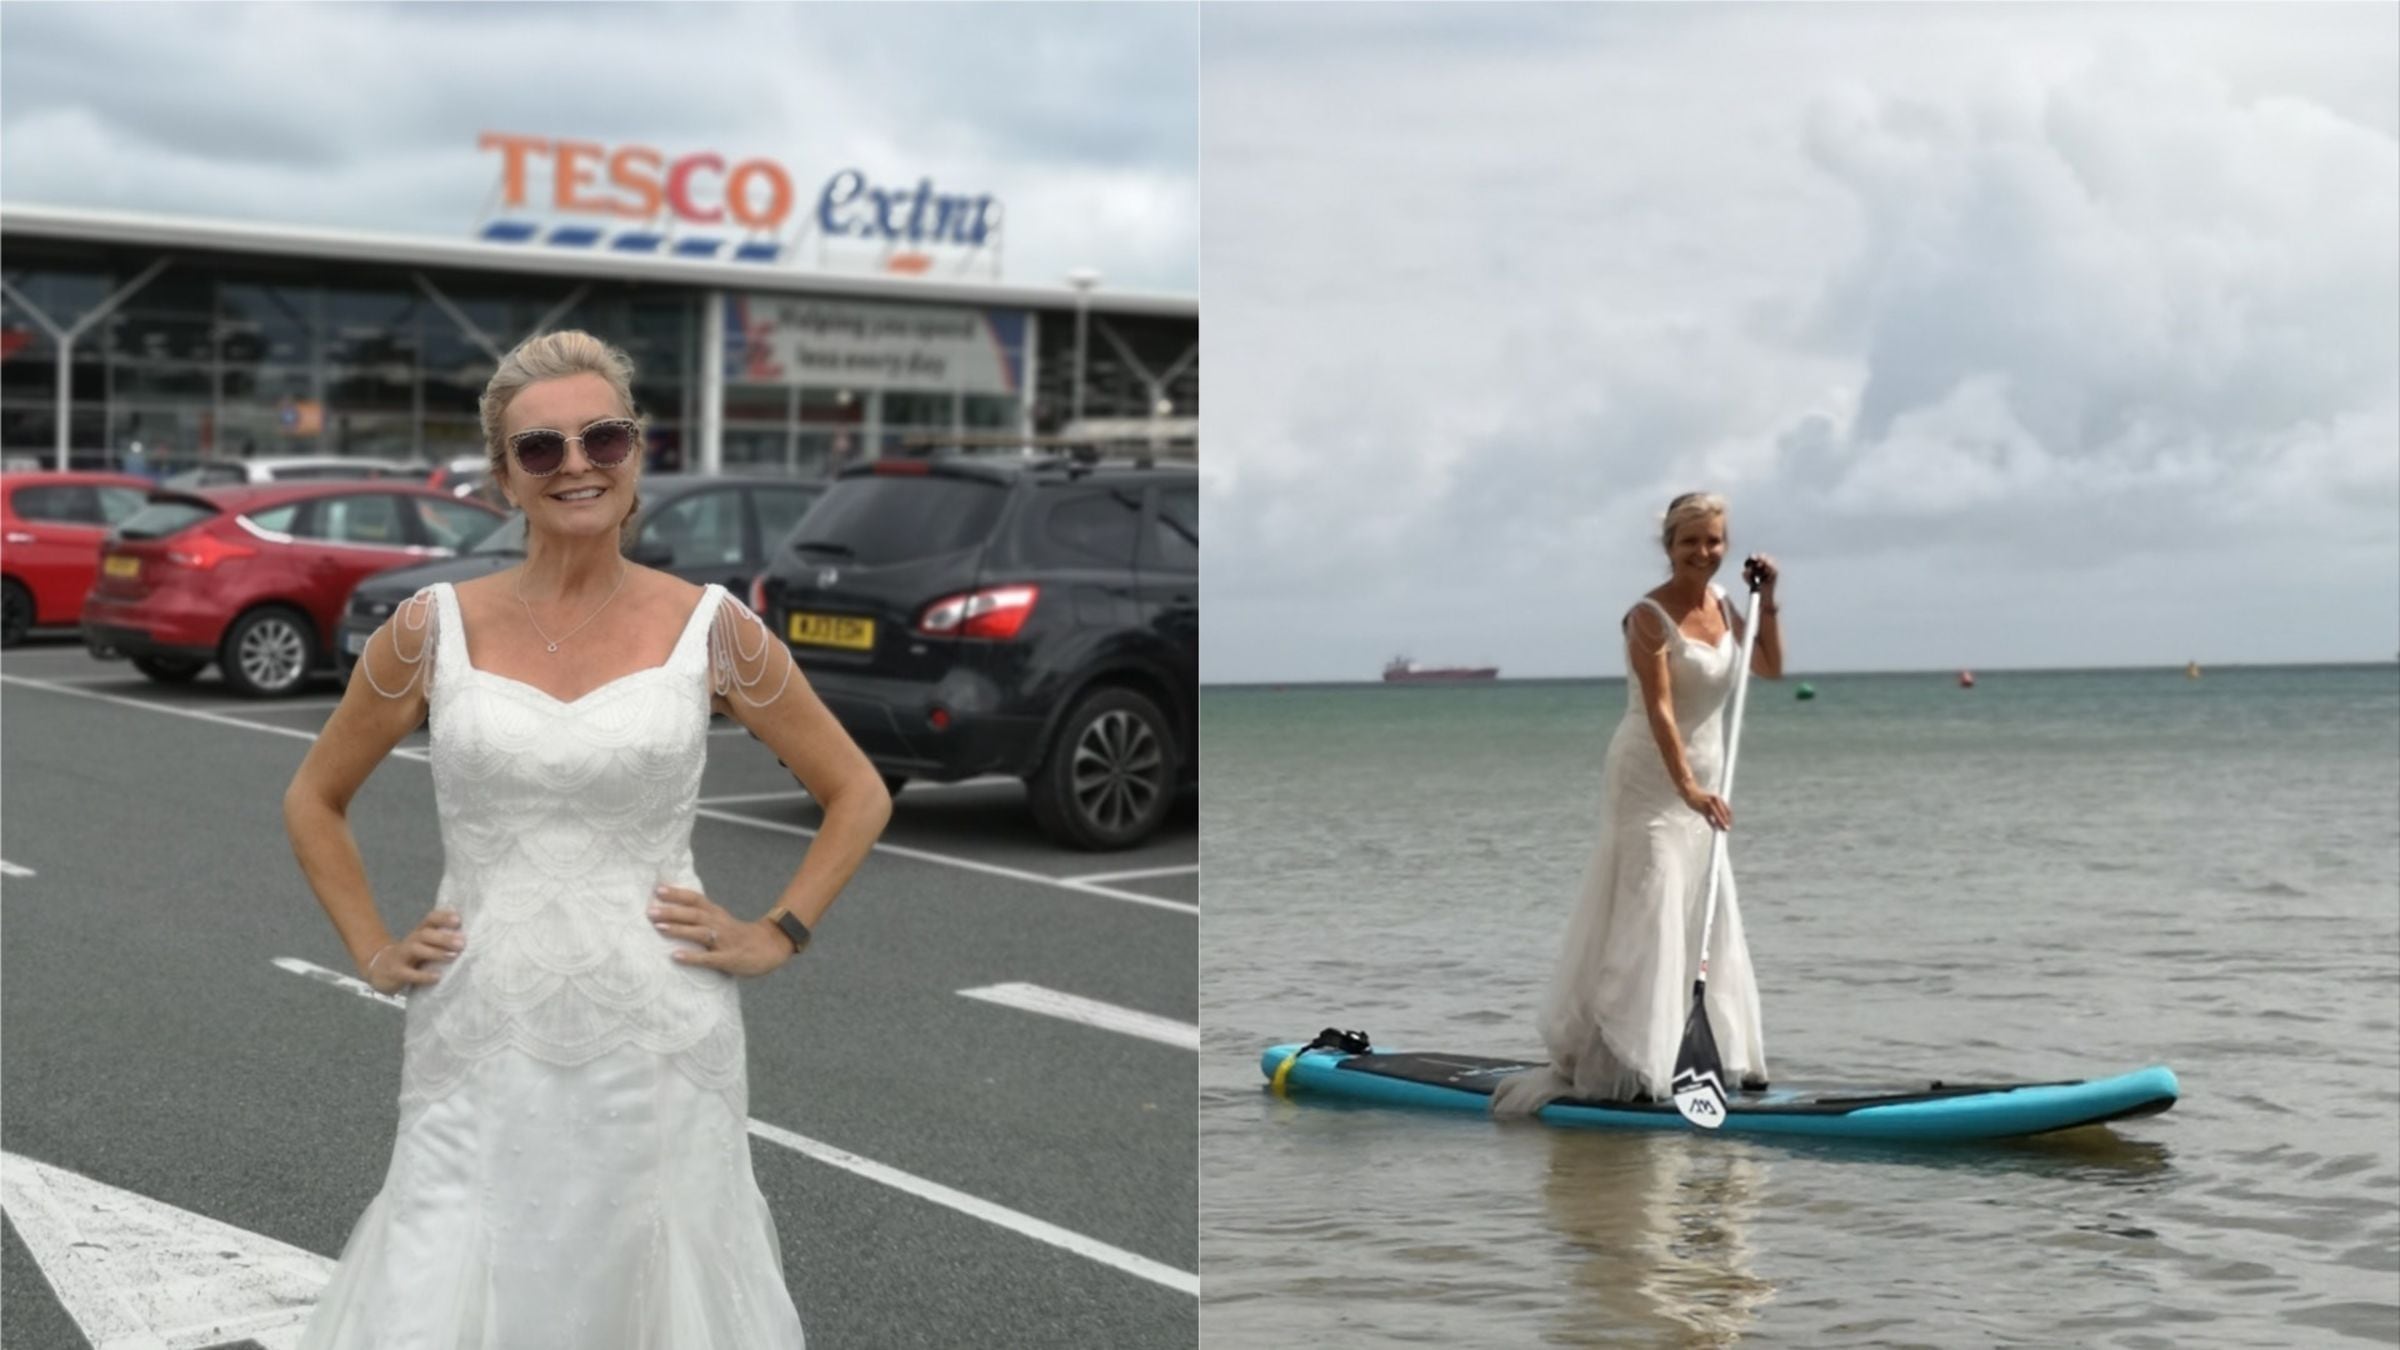 Dawn Winfield-Hunt, from the Isle of Wight, said she loves her dress and didn’t want to just wear it for one day.